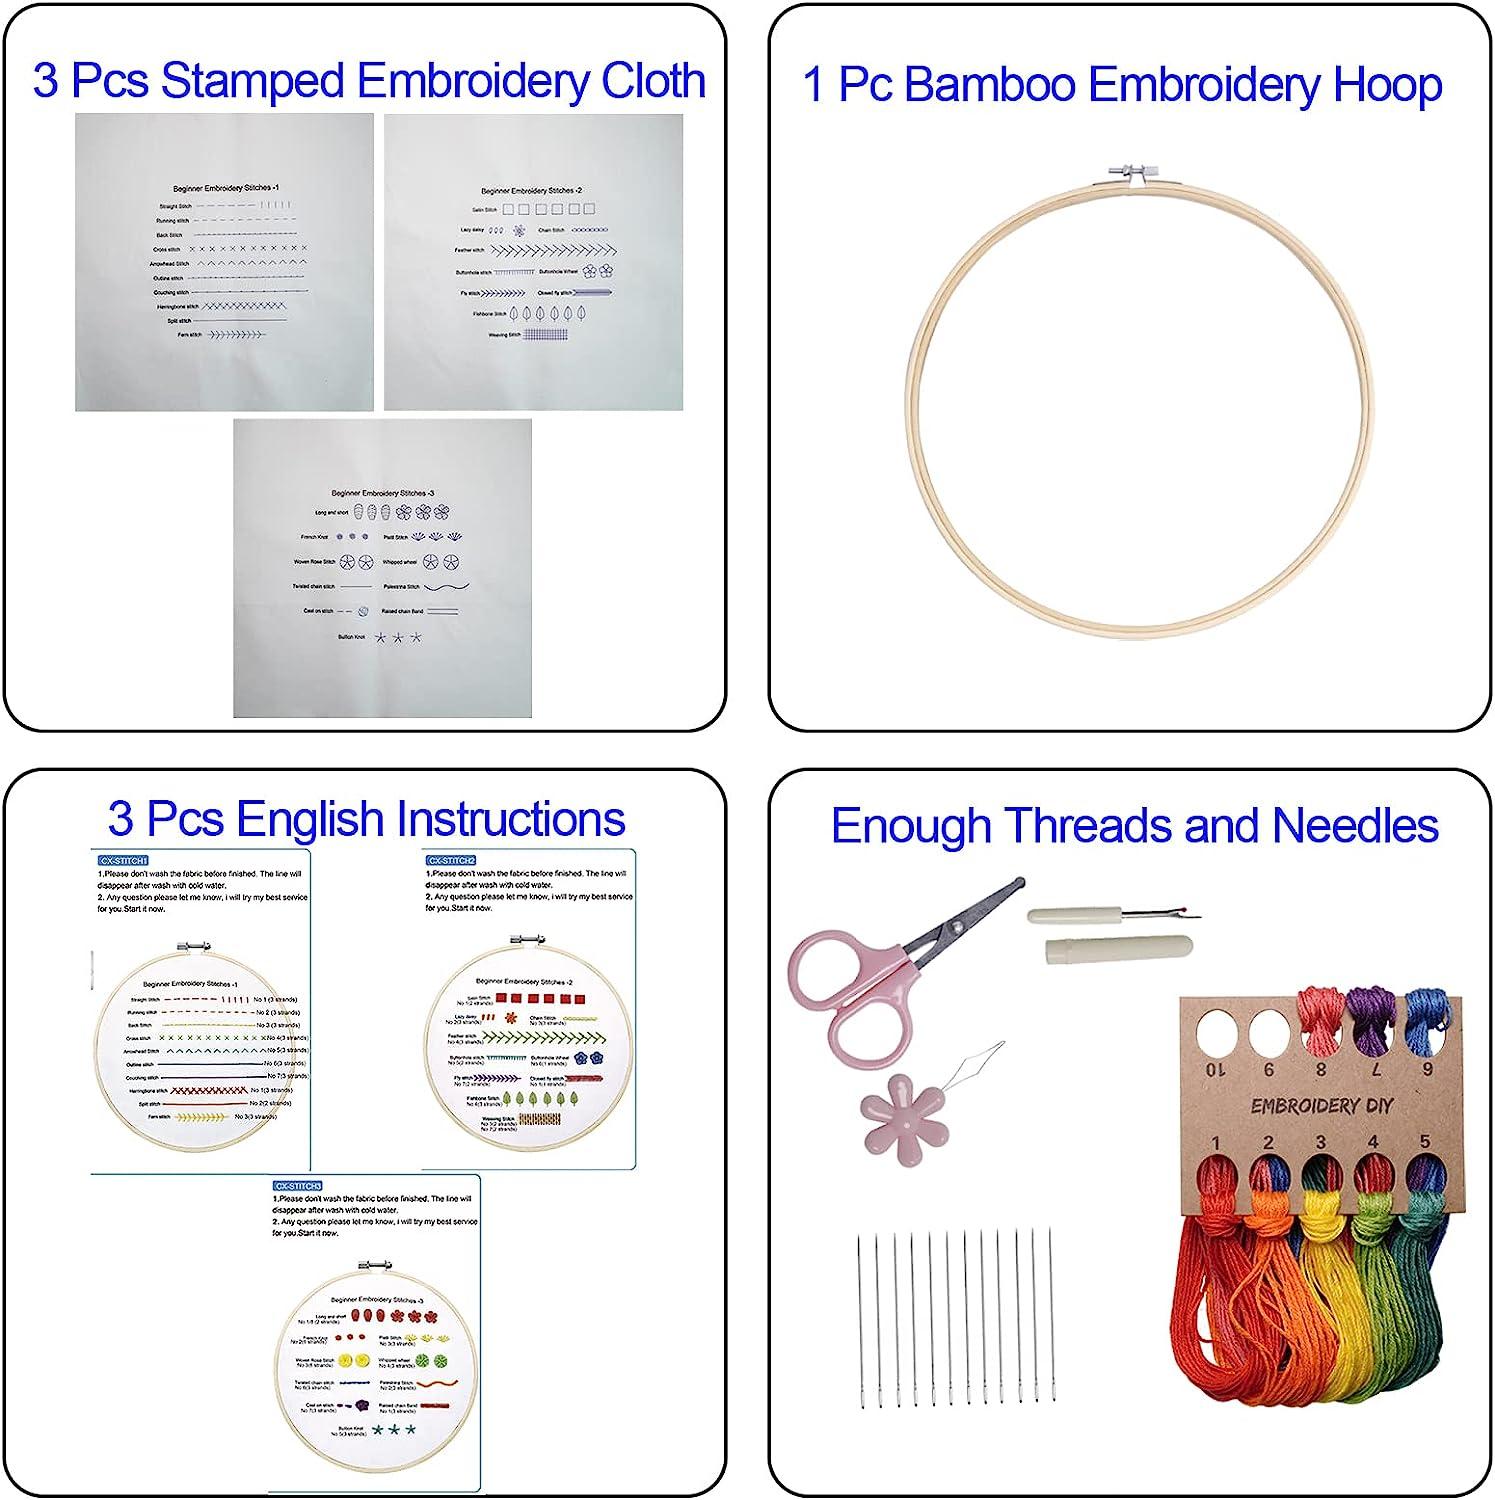 chfine 3 Sets Embroidery Stitches Practice Kit, Learn 23 Different Stitches Embroidery Kit for Beginners with Hoop Tools & Videos for DIY Craft